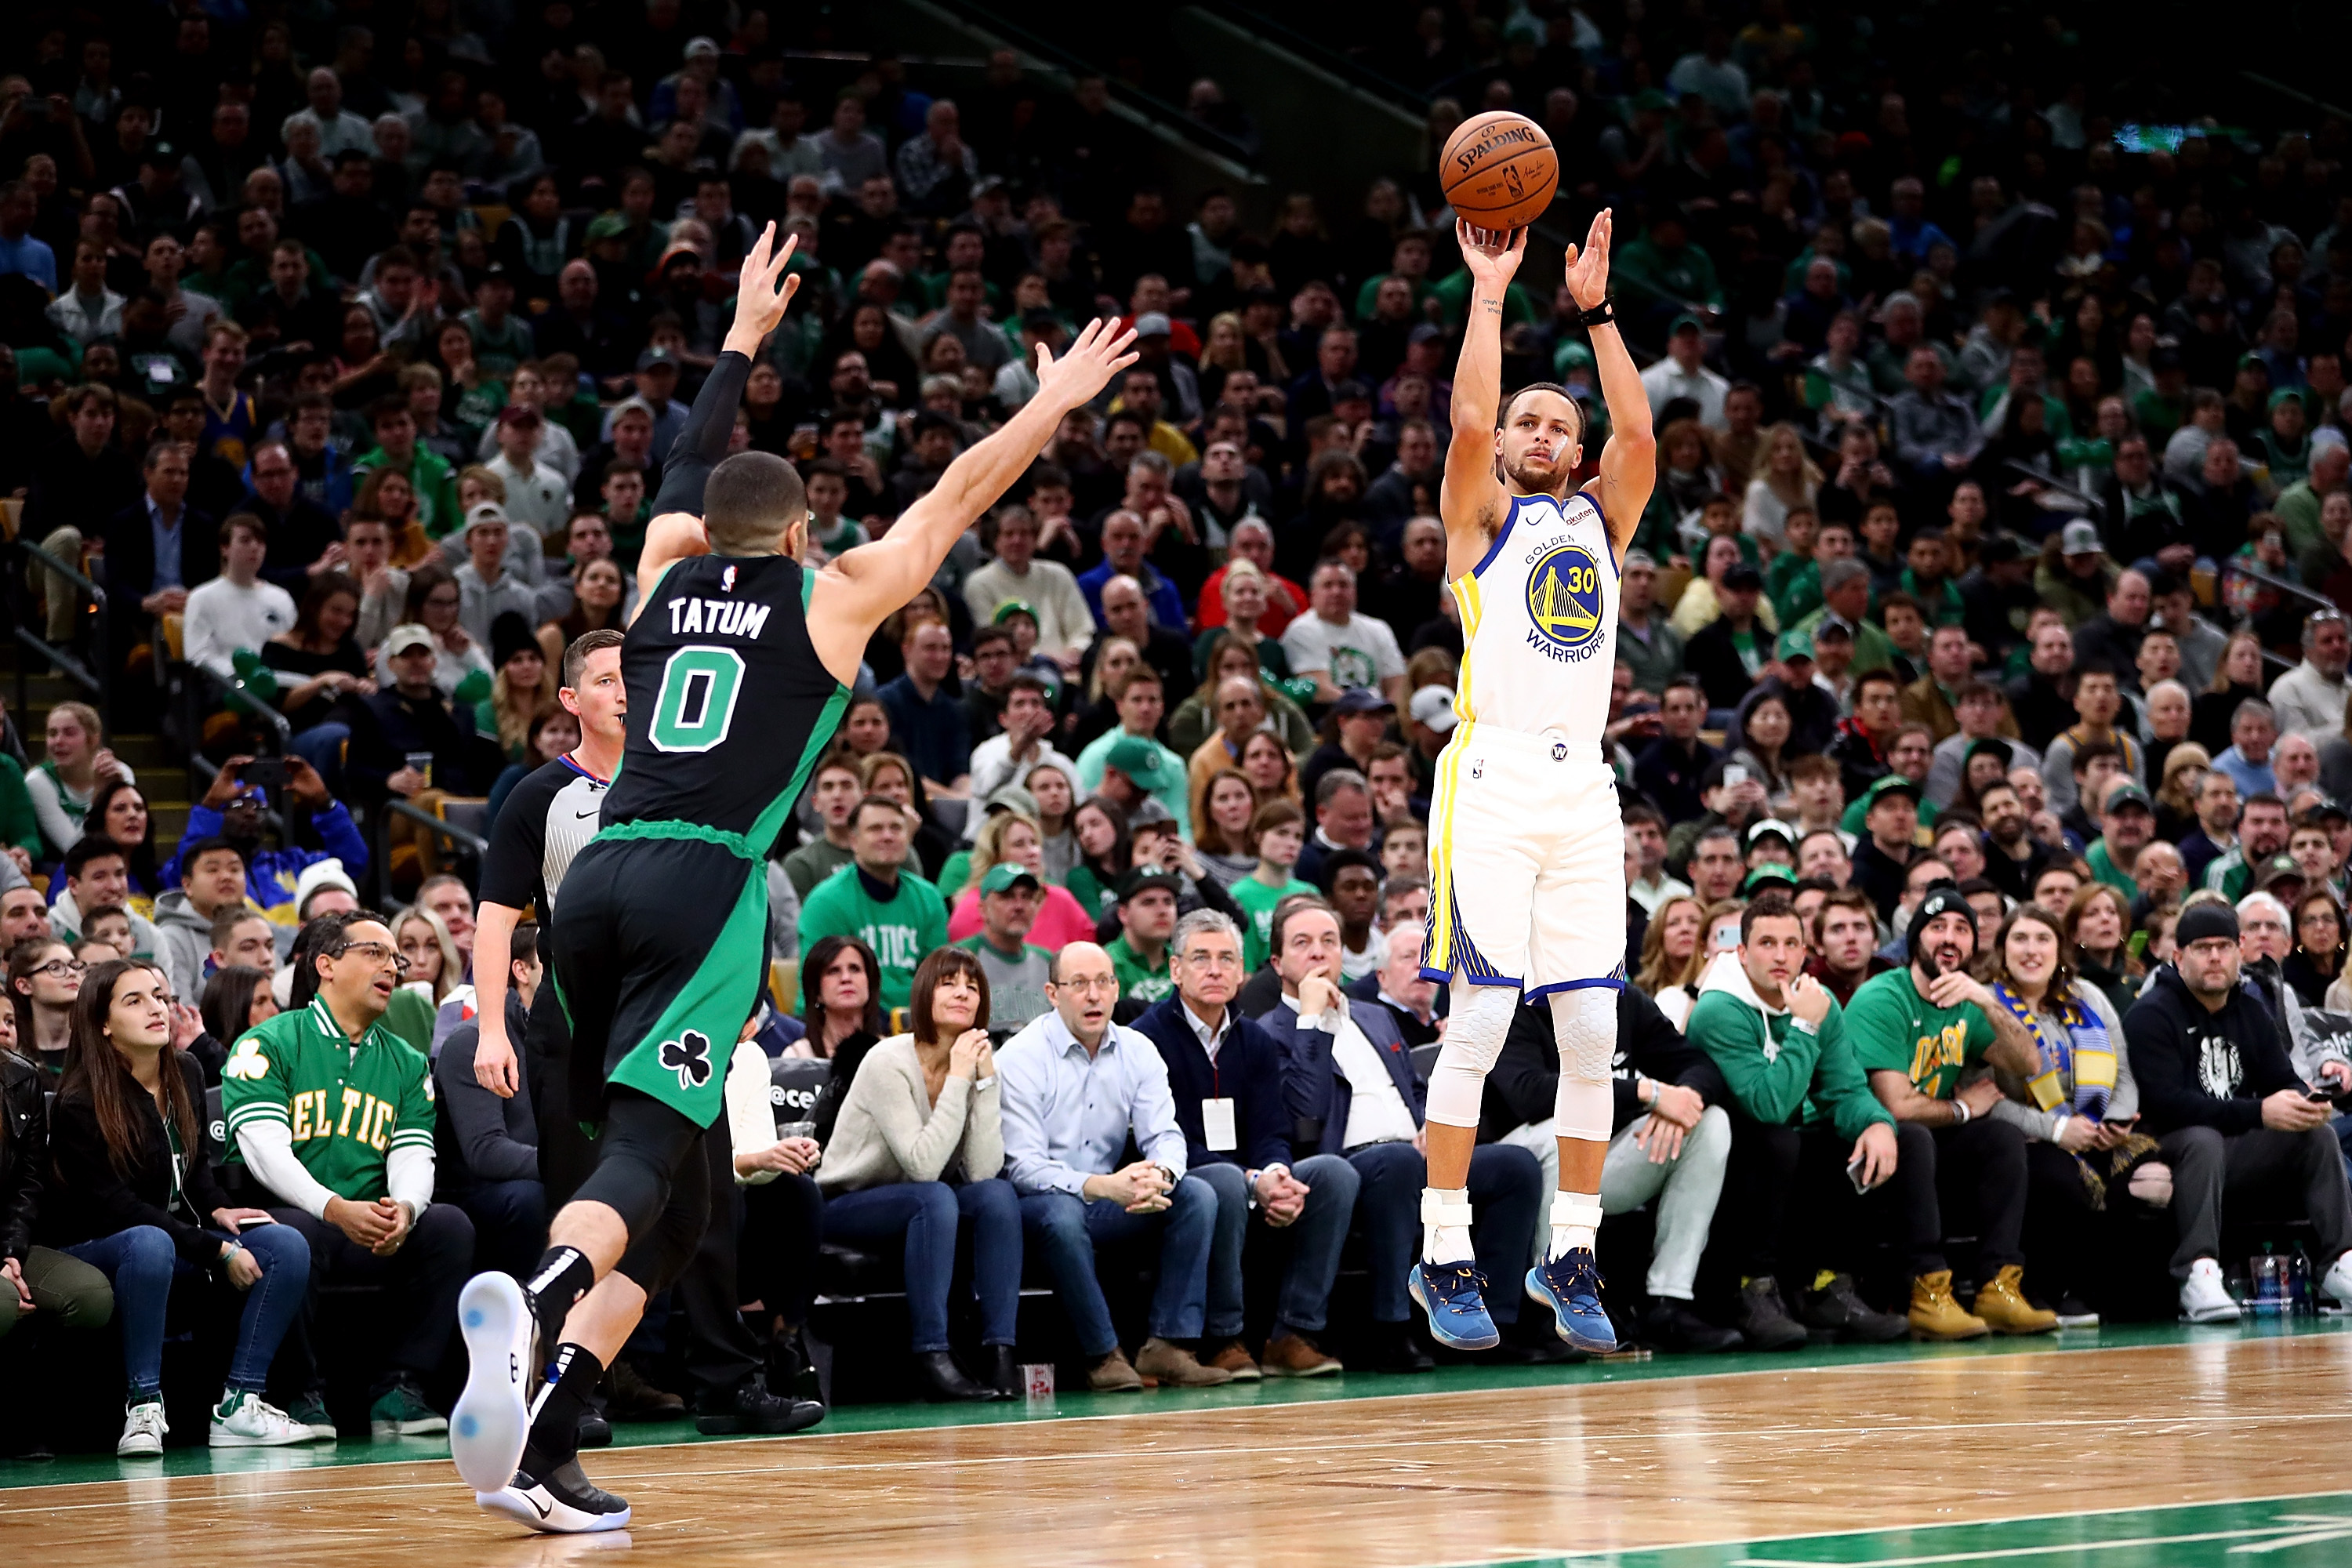 Steph Curry: Really?! Strips Tatum and sinks buzzer-beating half